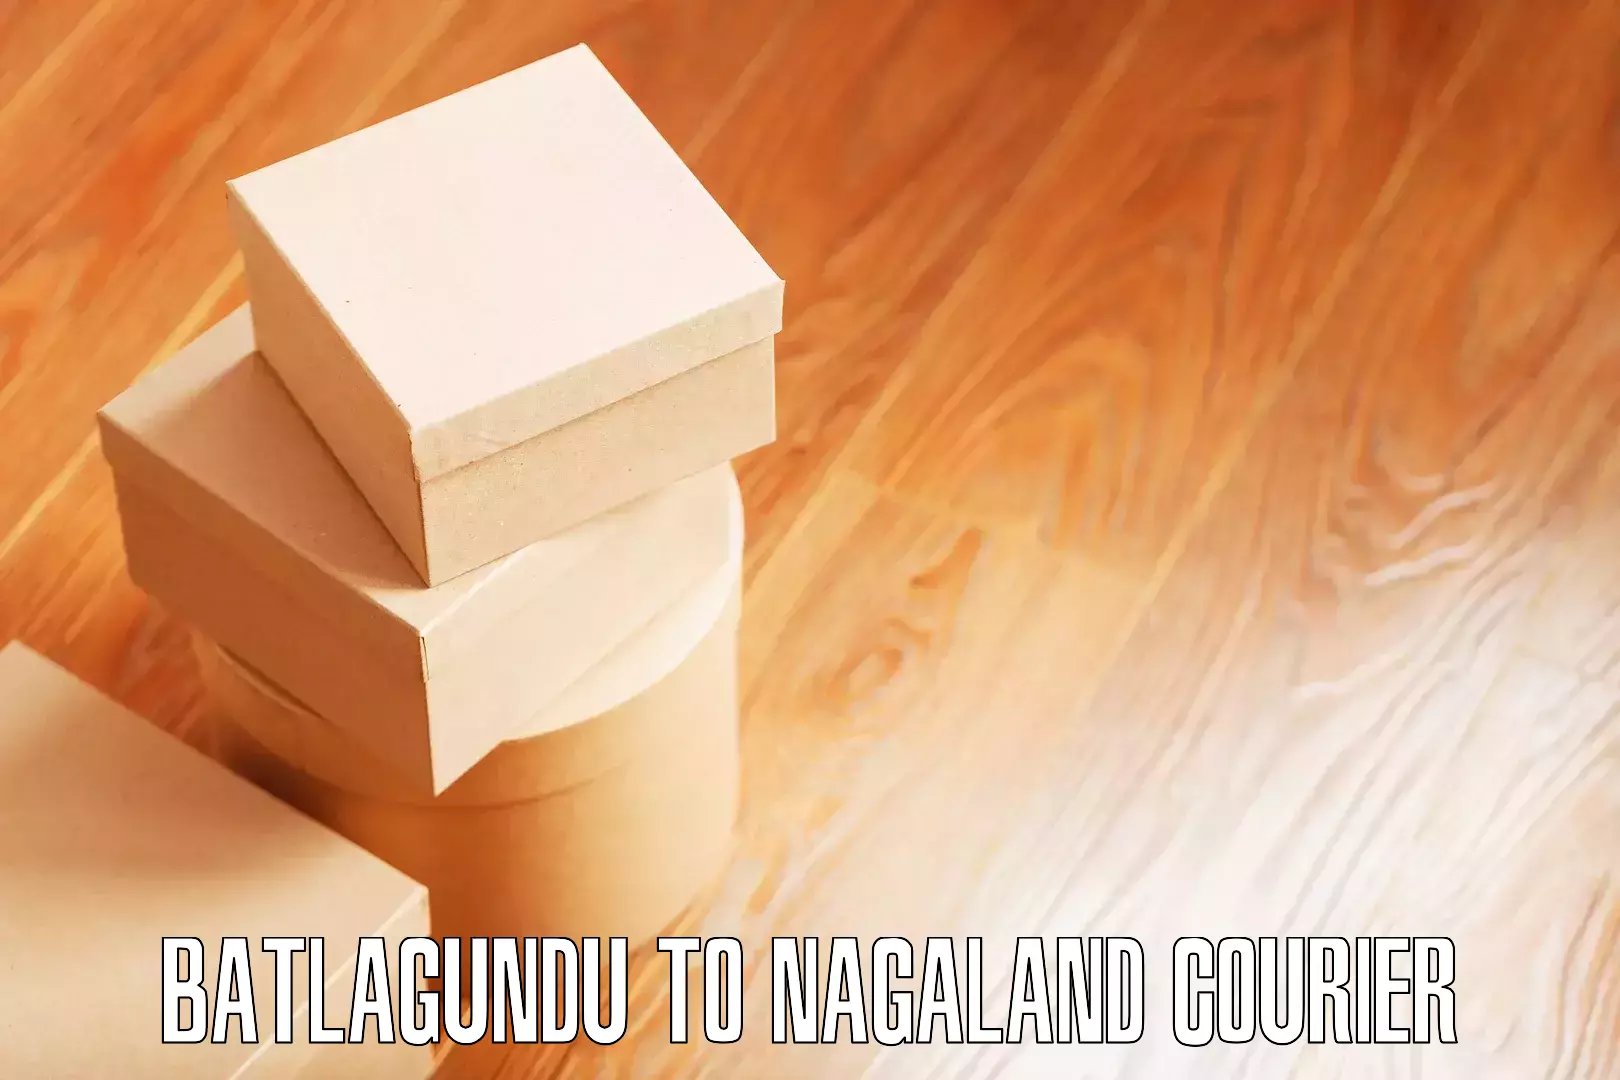 Personalized relocation plans in Batlagundu to Nagaland